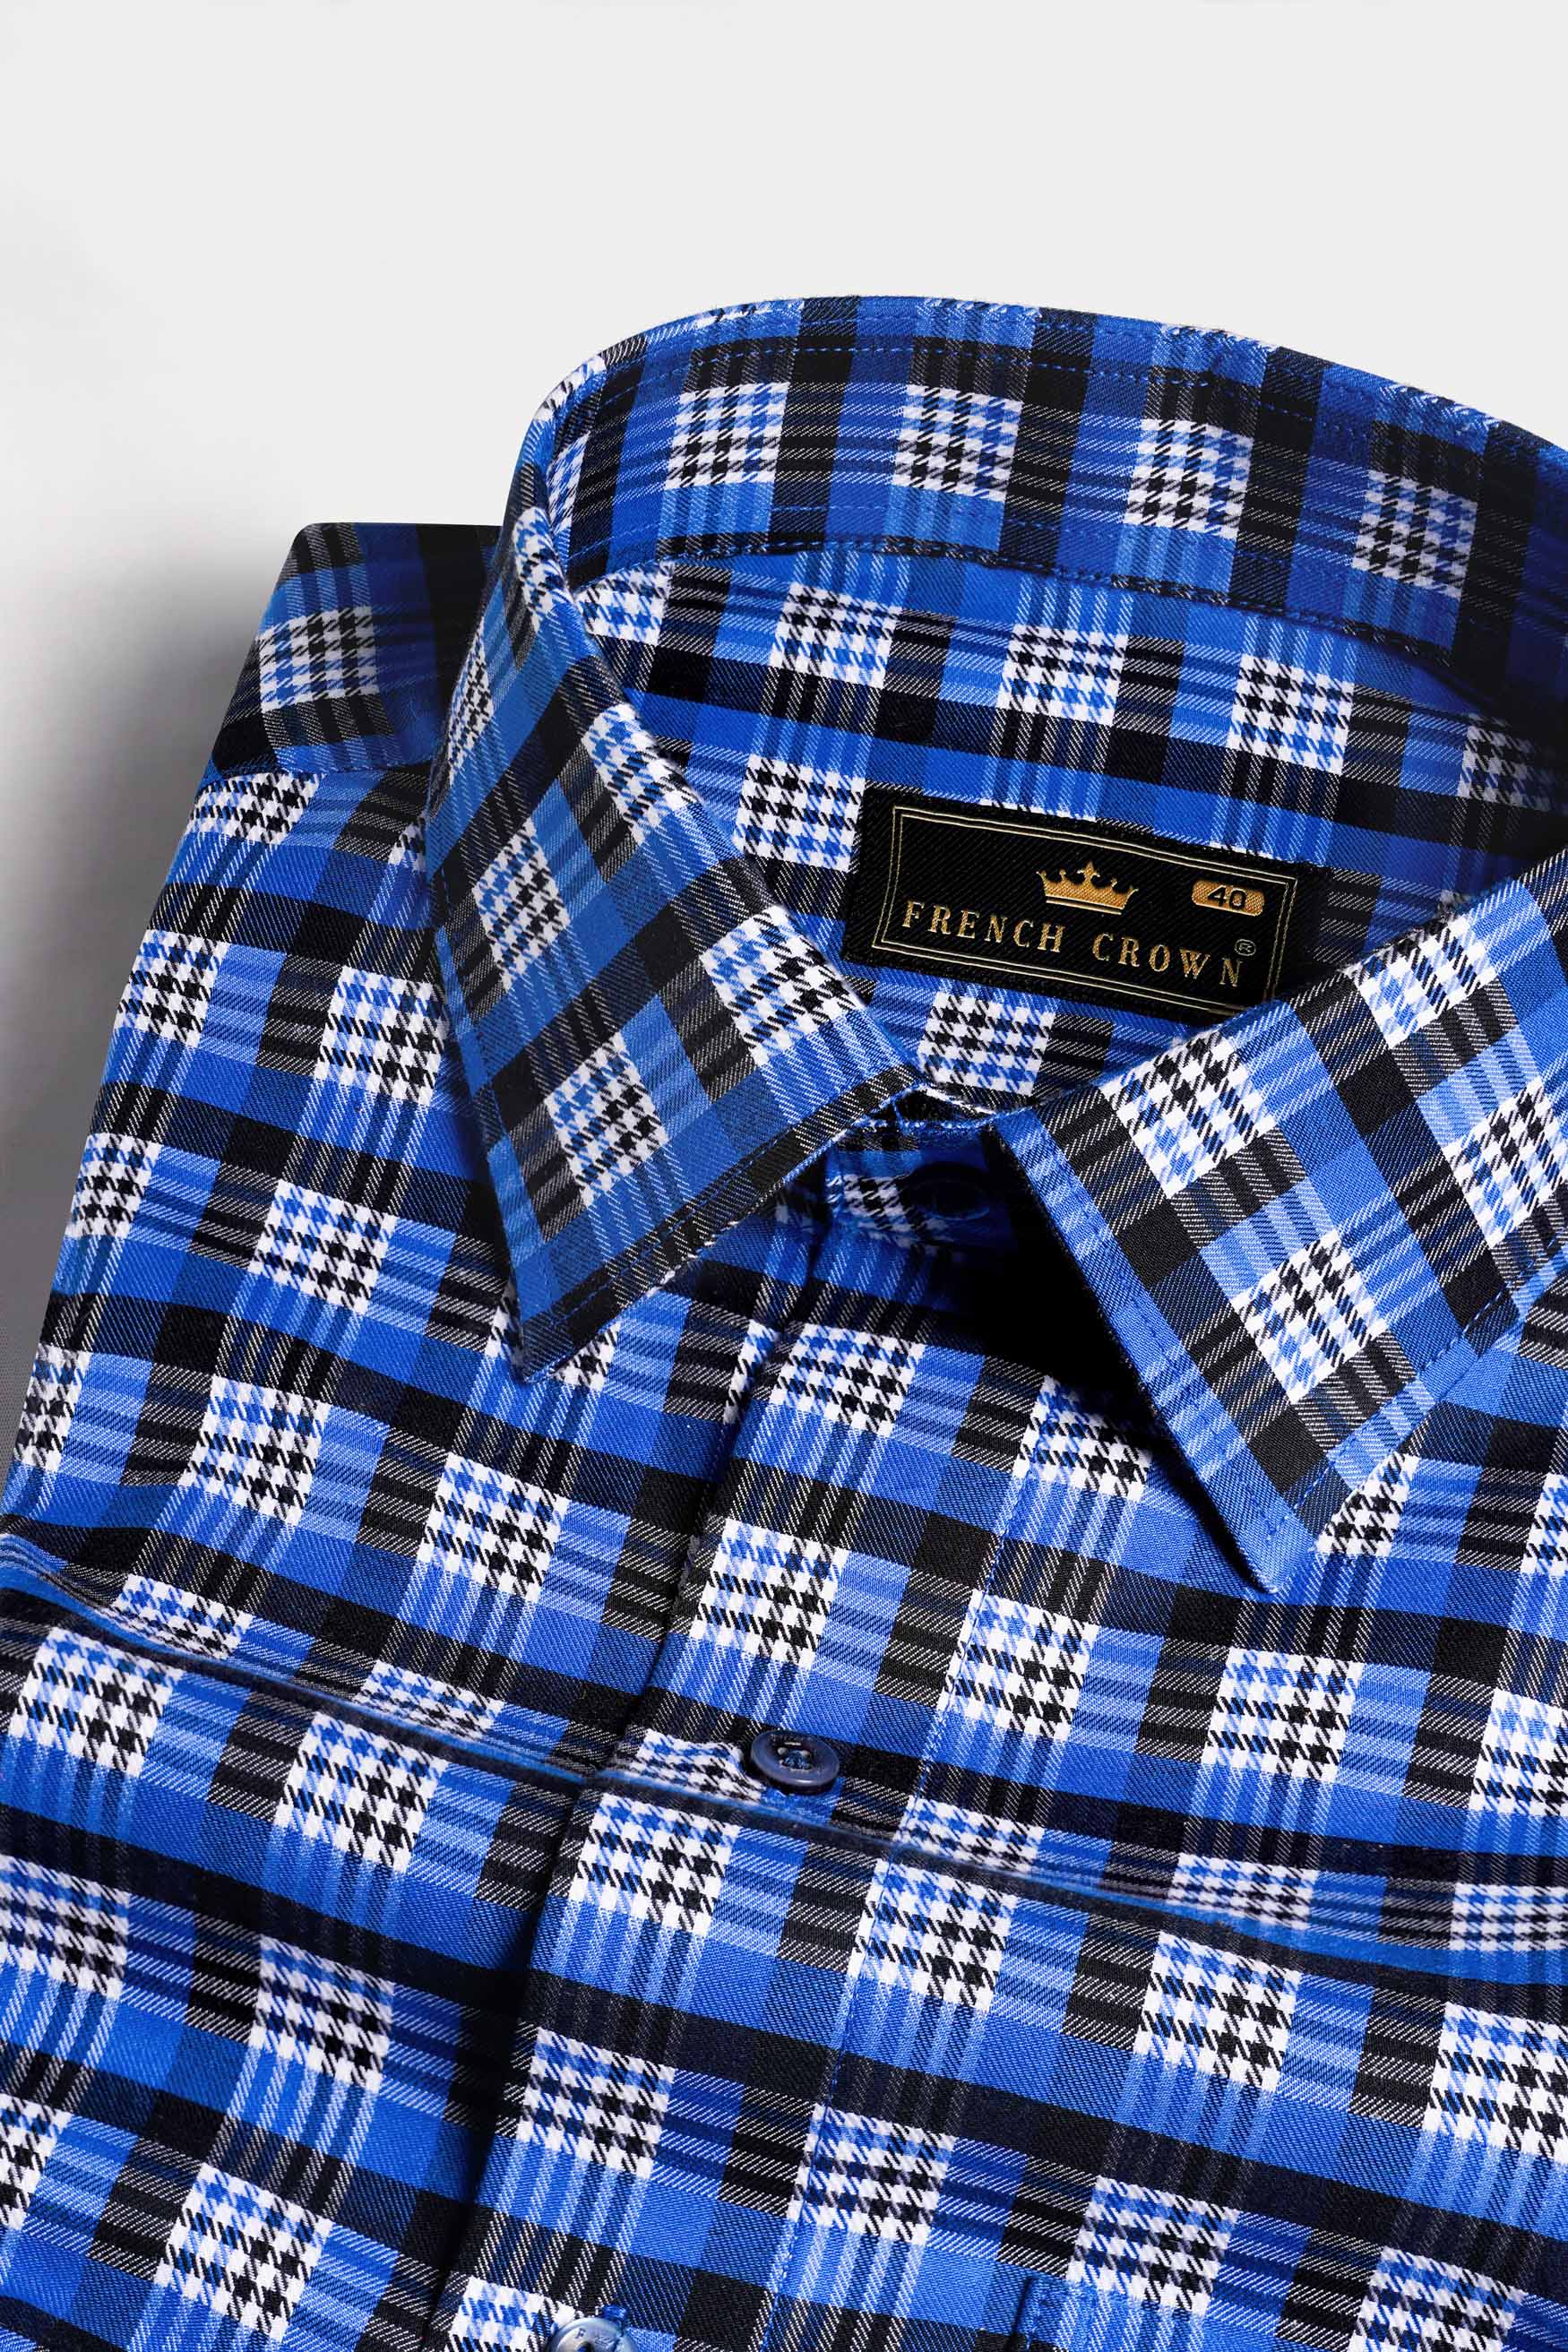 Azul Blue and Black Checkered Houndstooth Shirt 11269-BLE-38, 11269-BLE-H-38, 11269-BLE-39, 11269-BLE-H-39, 11269-BLE-40, 11269-BLE-H-40, 11269-BLE-42, 11269-BLE-H-42, 11269-BLE-44, 11269-BLE-H-44, 11269-BLE-46, 11269-BLE-H-46, 11269-BLE-48, 11269-BLE-H-48, 11269-BLE-50, 11269-BLE-H-50, 11269-BLE-52, 11269-BLE-H-52